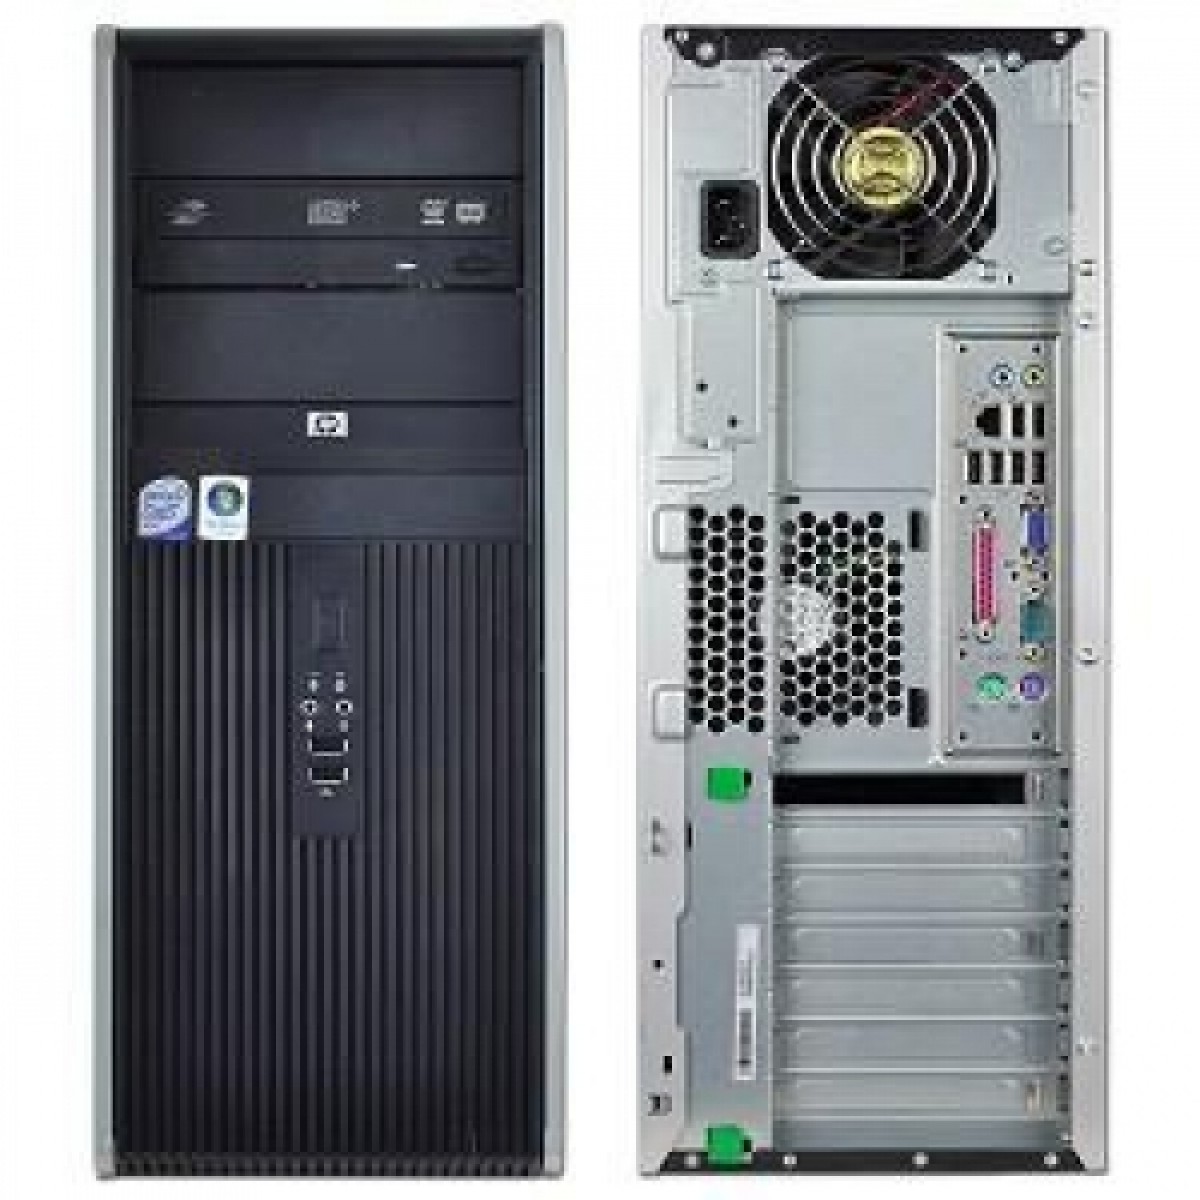 hp compaq dc7700 small form factor pc display drivers